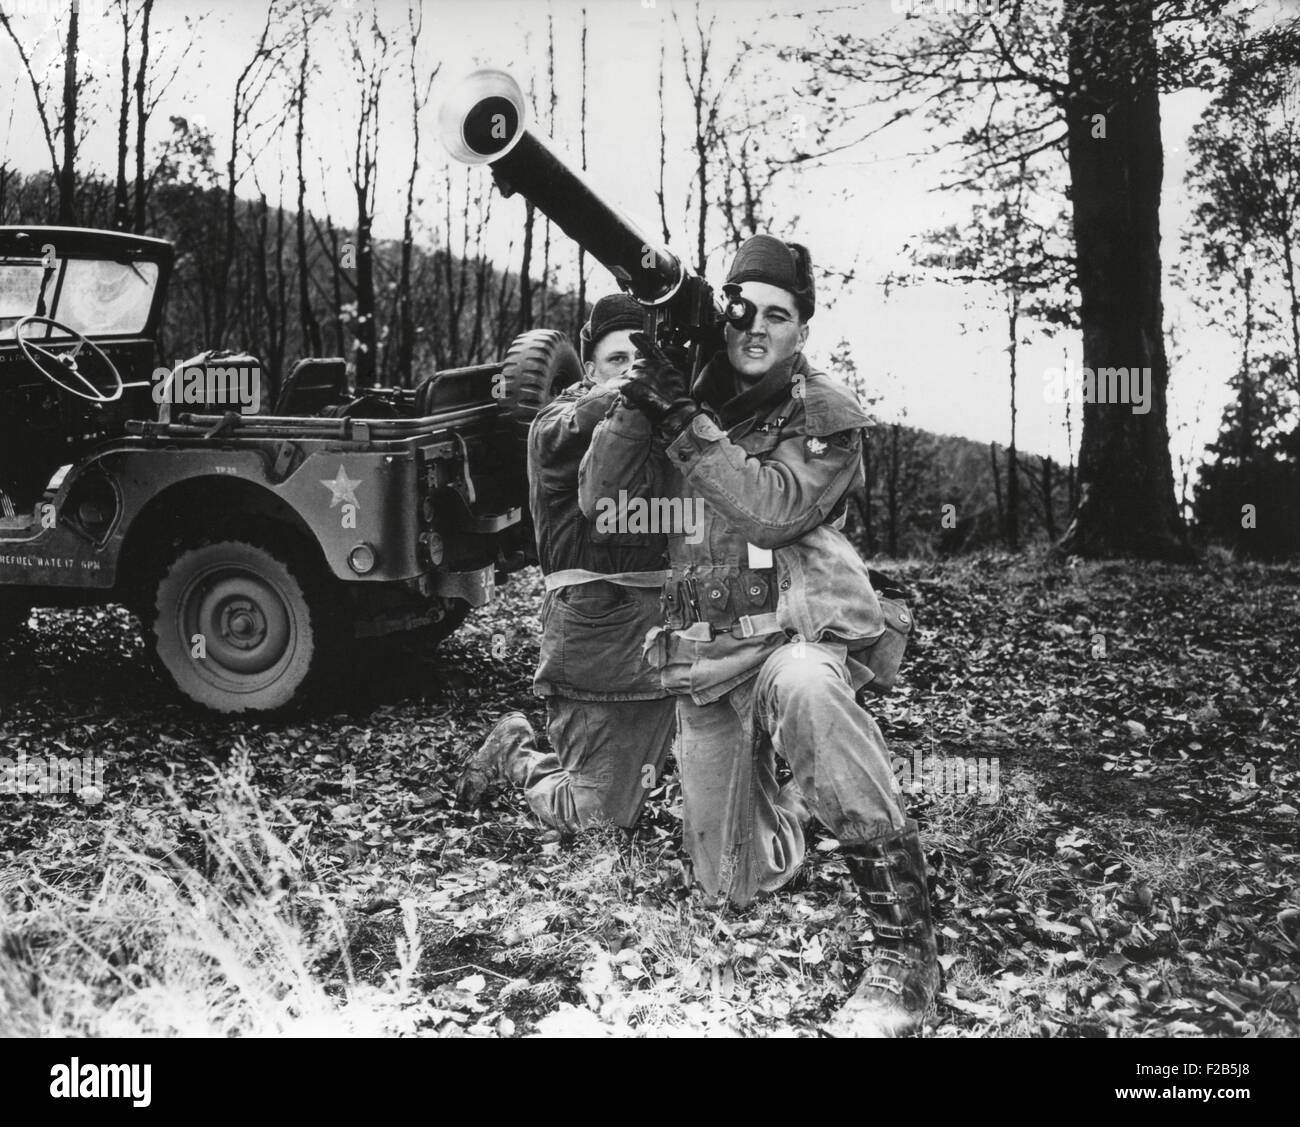 Elvis Presley training with a bazooka while on maneuvers in Germany. He served in Germany from October 1, 1958, until March 2, 1960, with 1st Medium Tank Battalion, 3d Armored Division. Ca. 1959 - (BSLOC 2014 17 105) Stock Photo